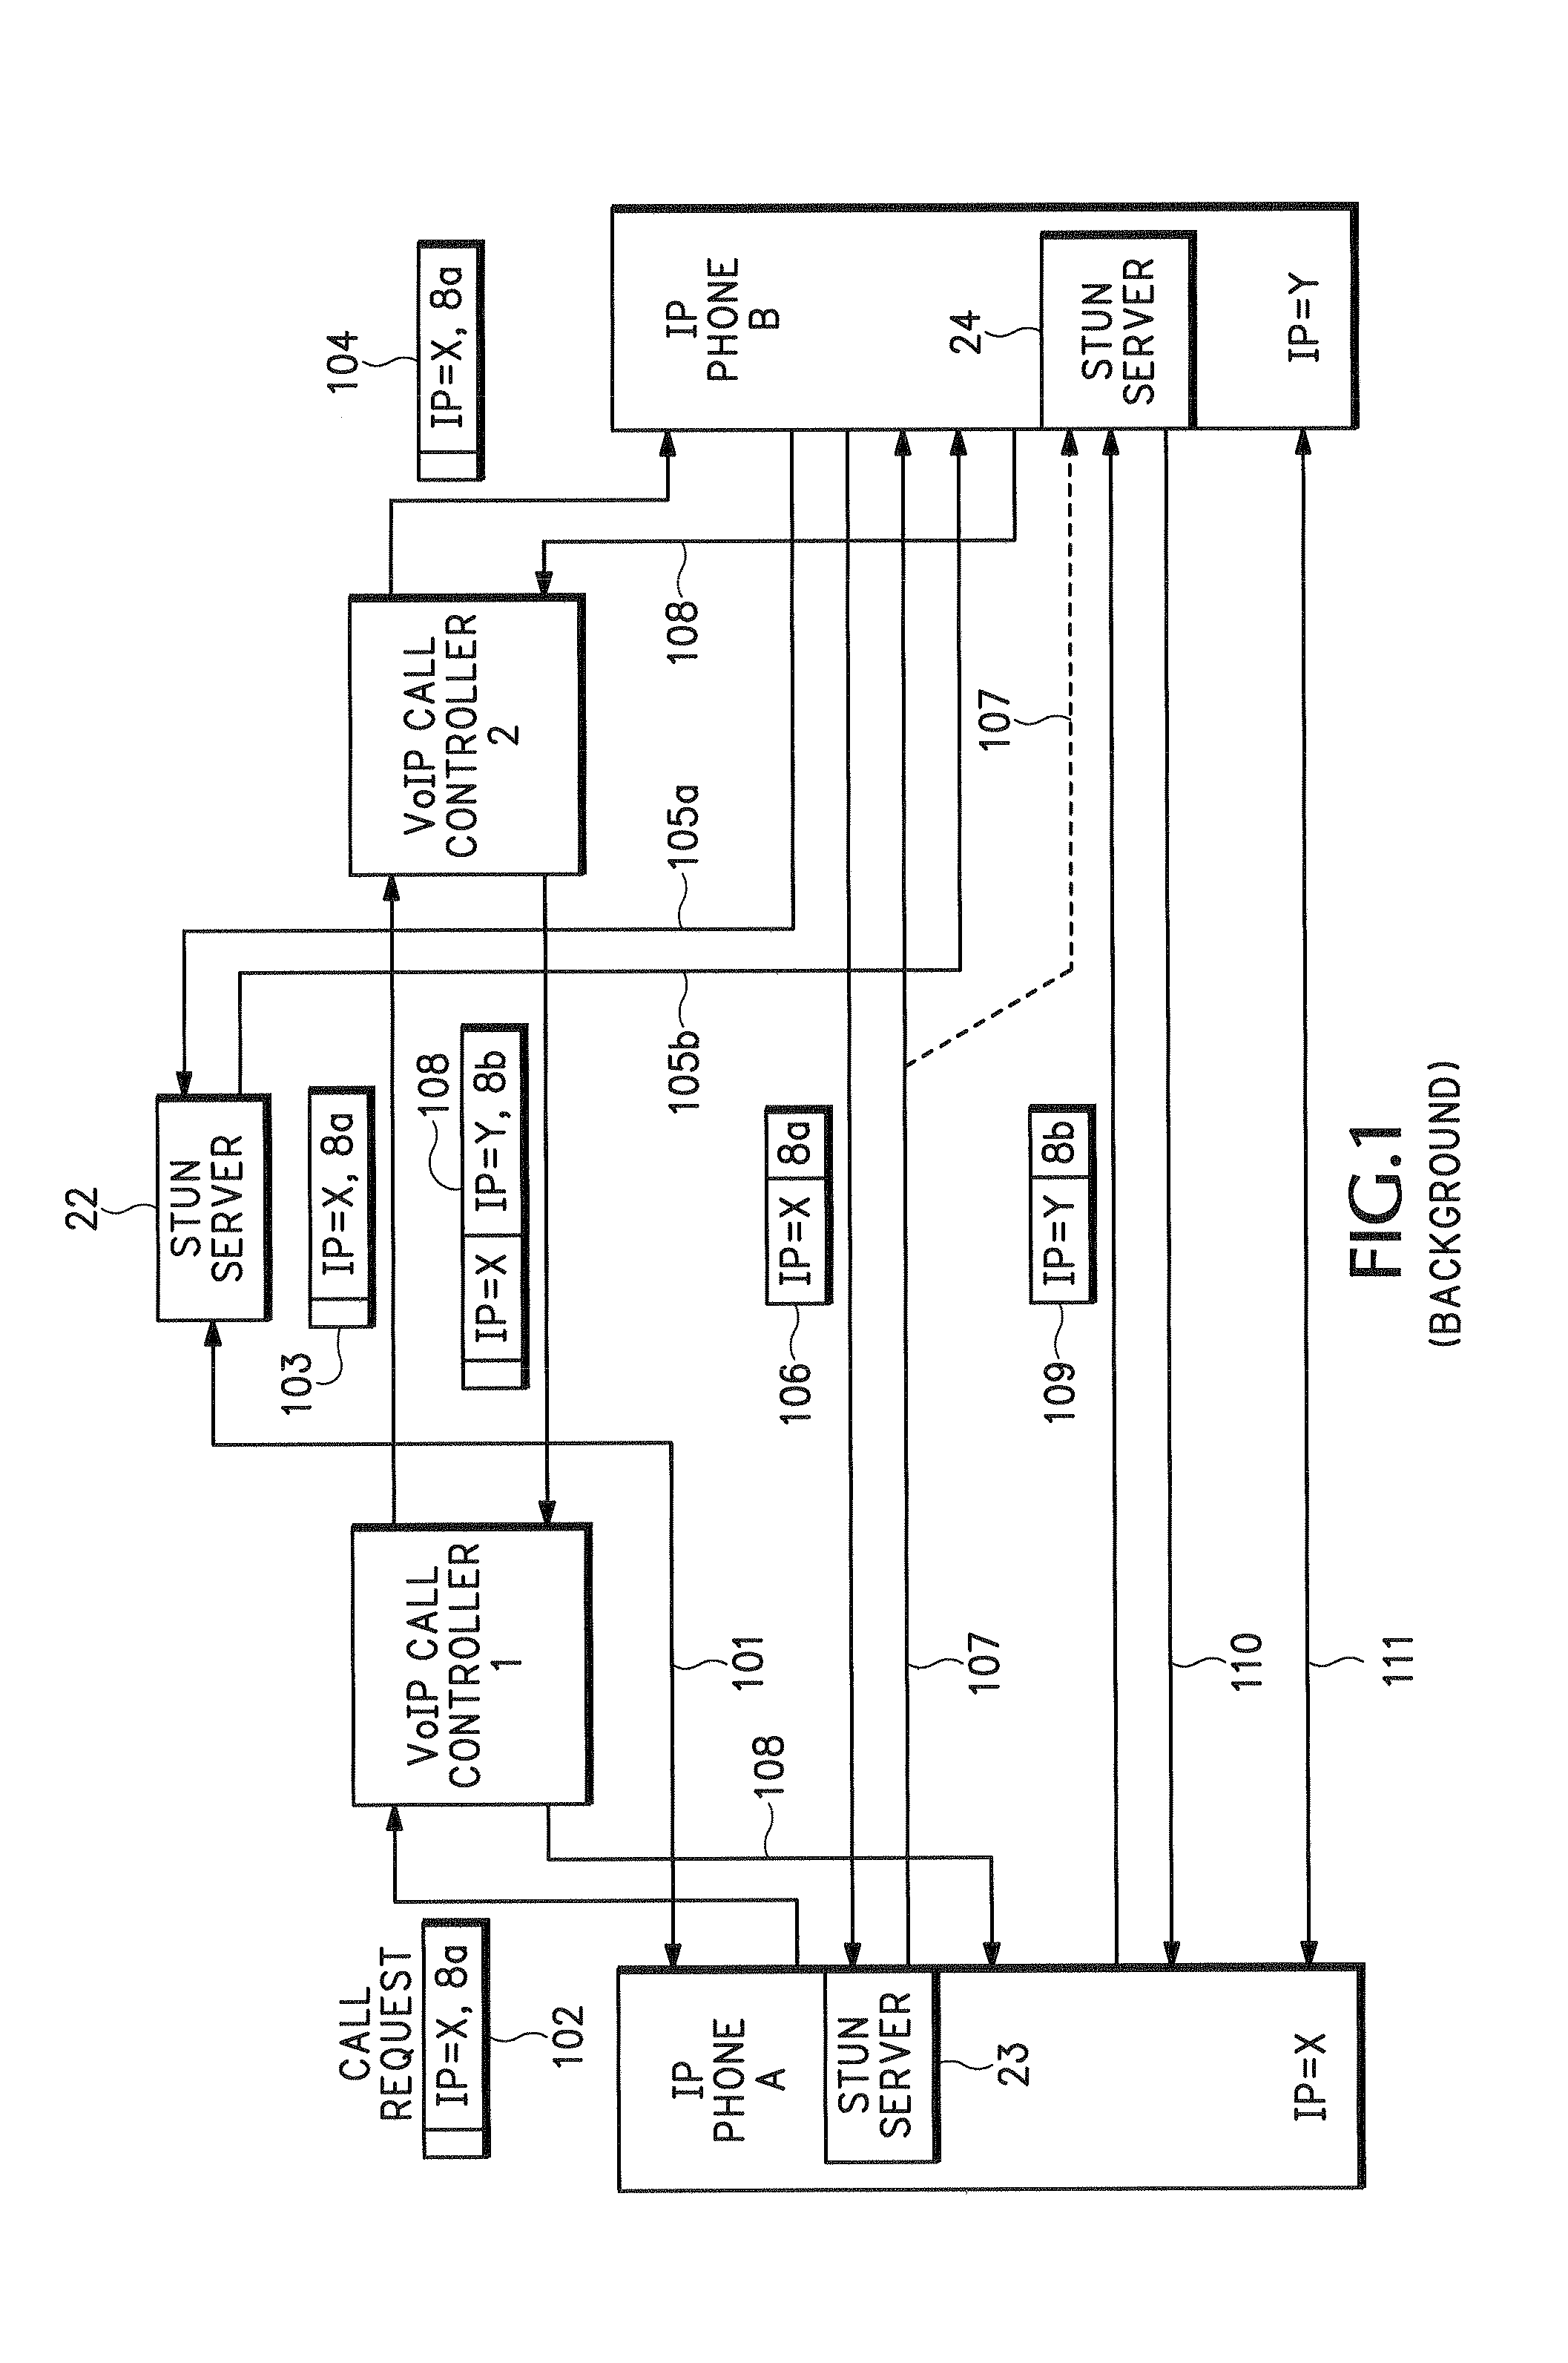 Method for stateful firewall inspection of ICE messages